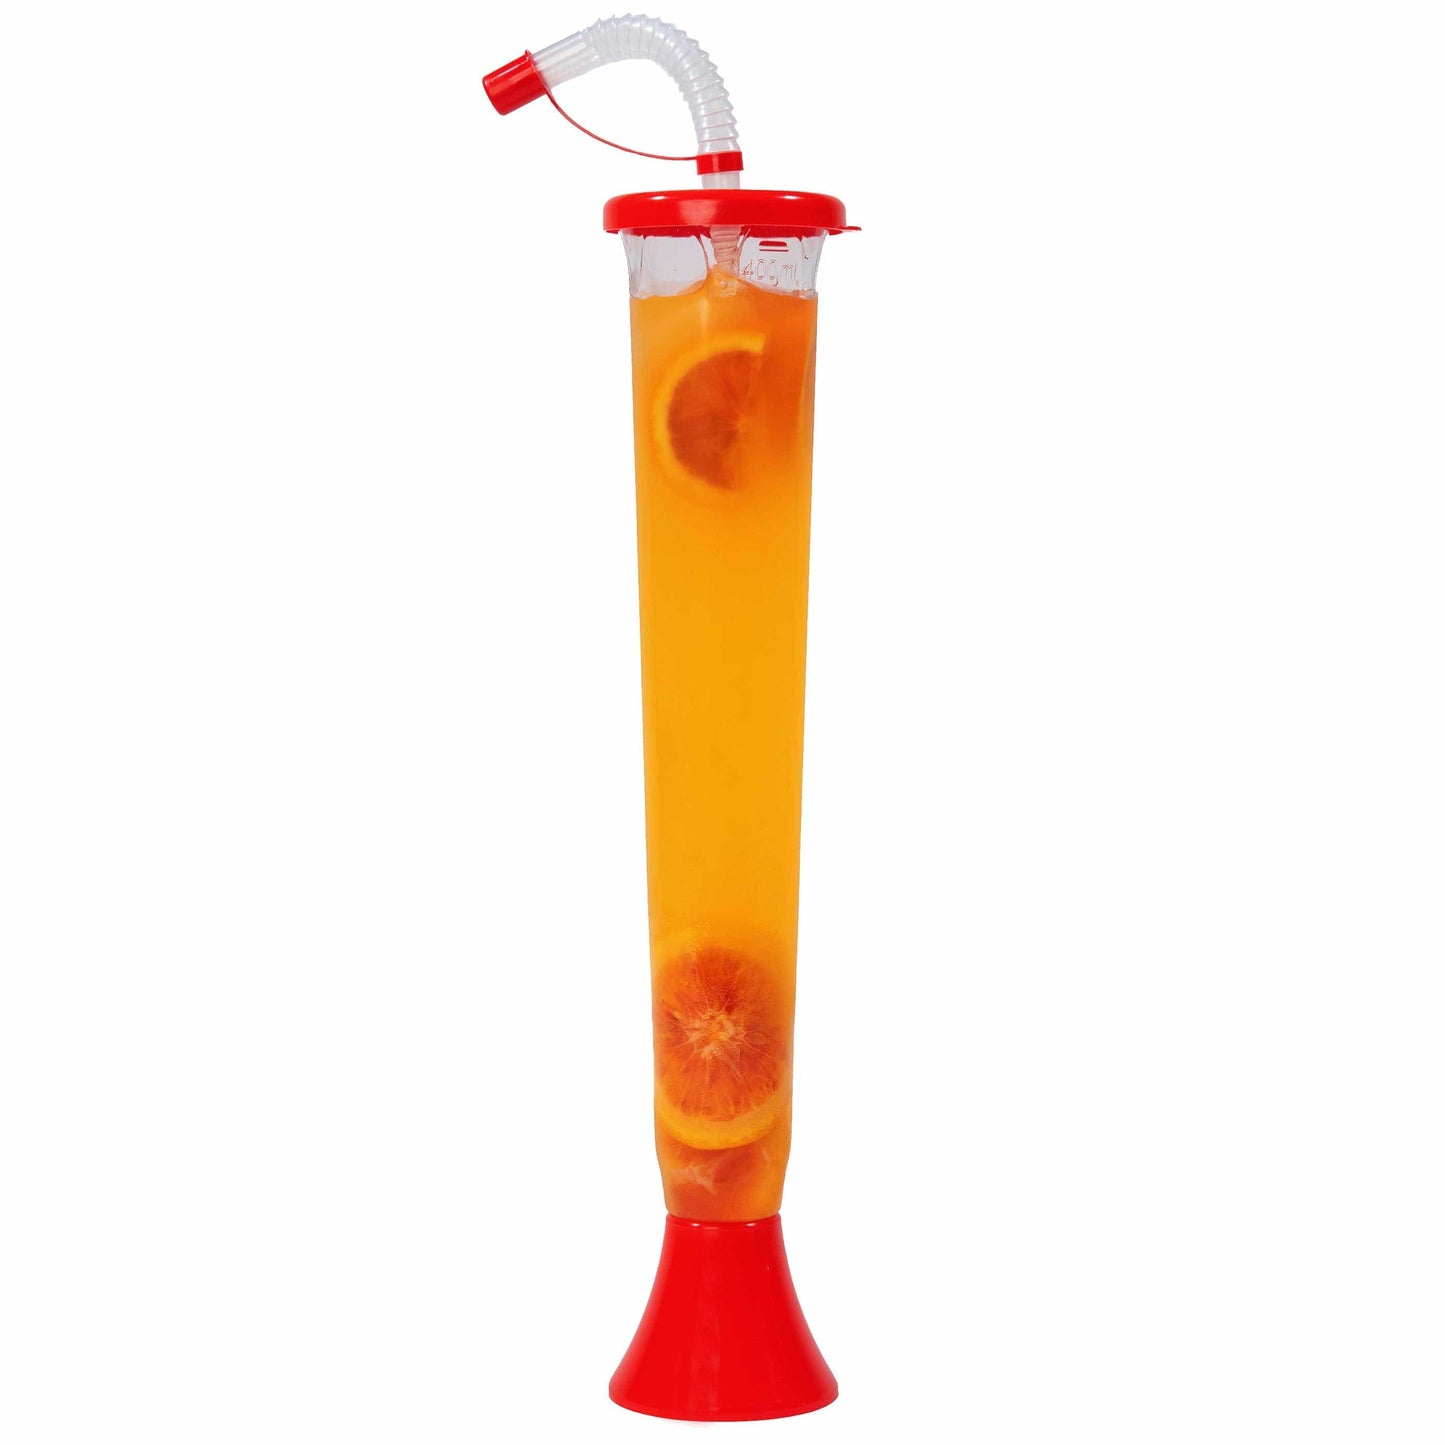 Sweet World USA Yard Cups (108 Cups) Yard Cups Variety Pack - 14oz - for Margaritas and Frozen Drinks cups with lids and straws